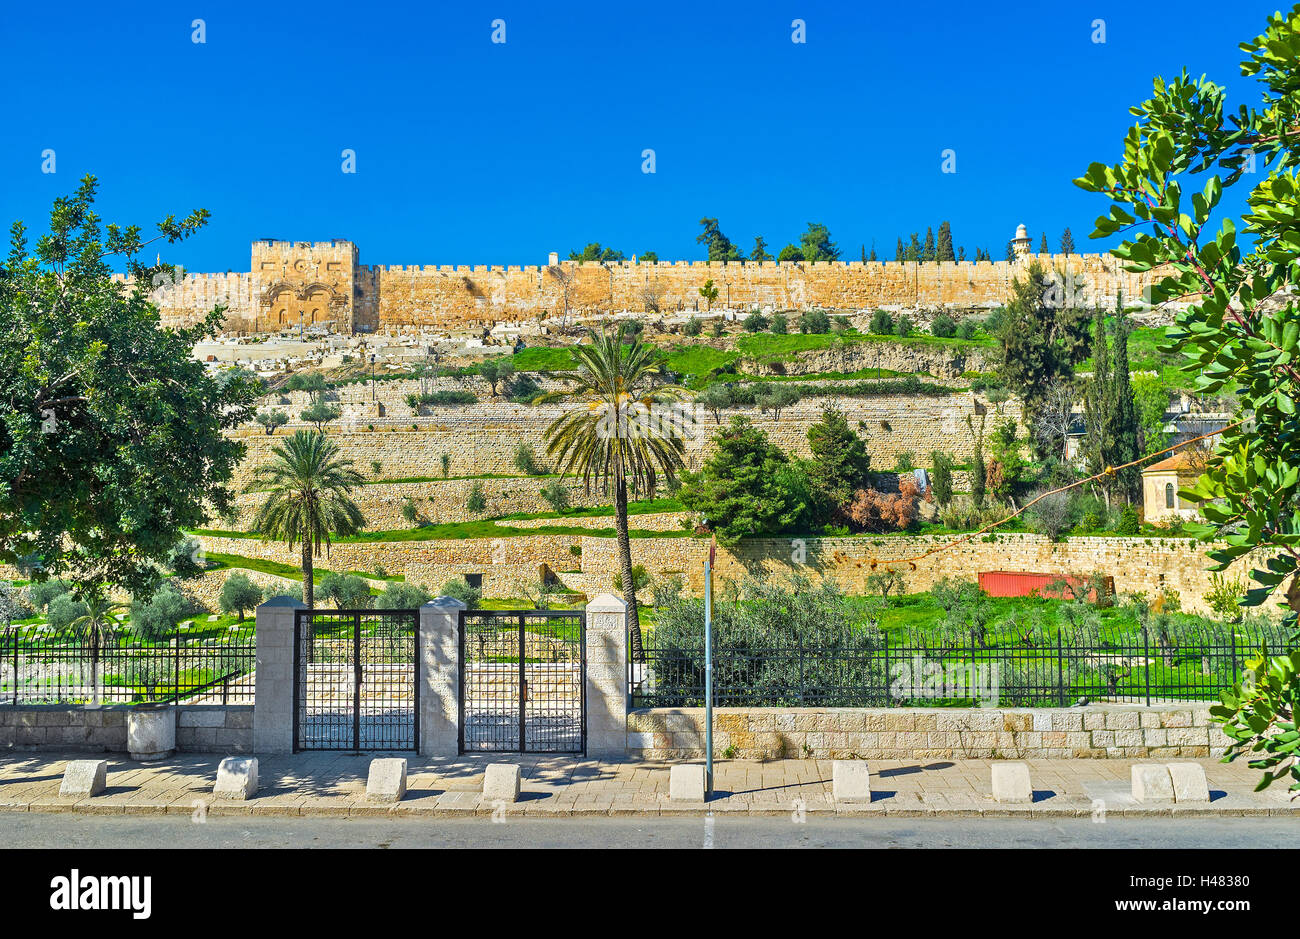 The Kidron Valley and the medieval walls of the old Jerusalem on the background, Israel. Stock Photo